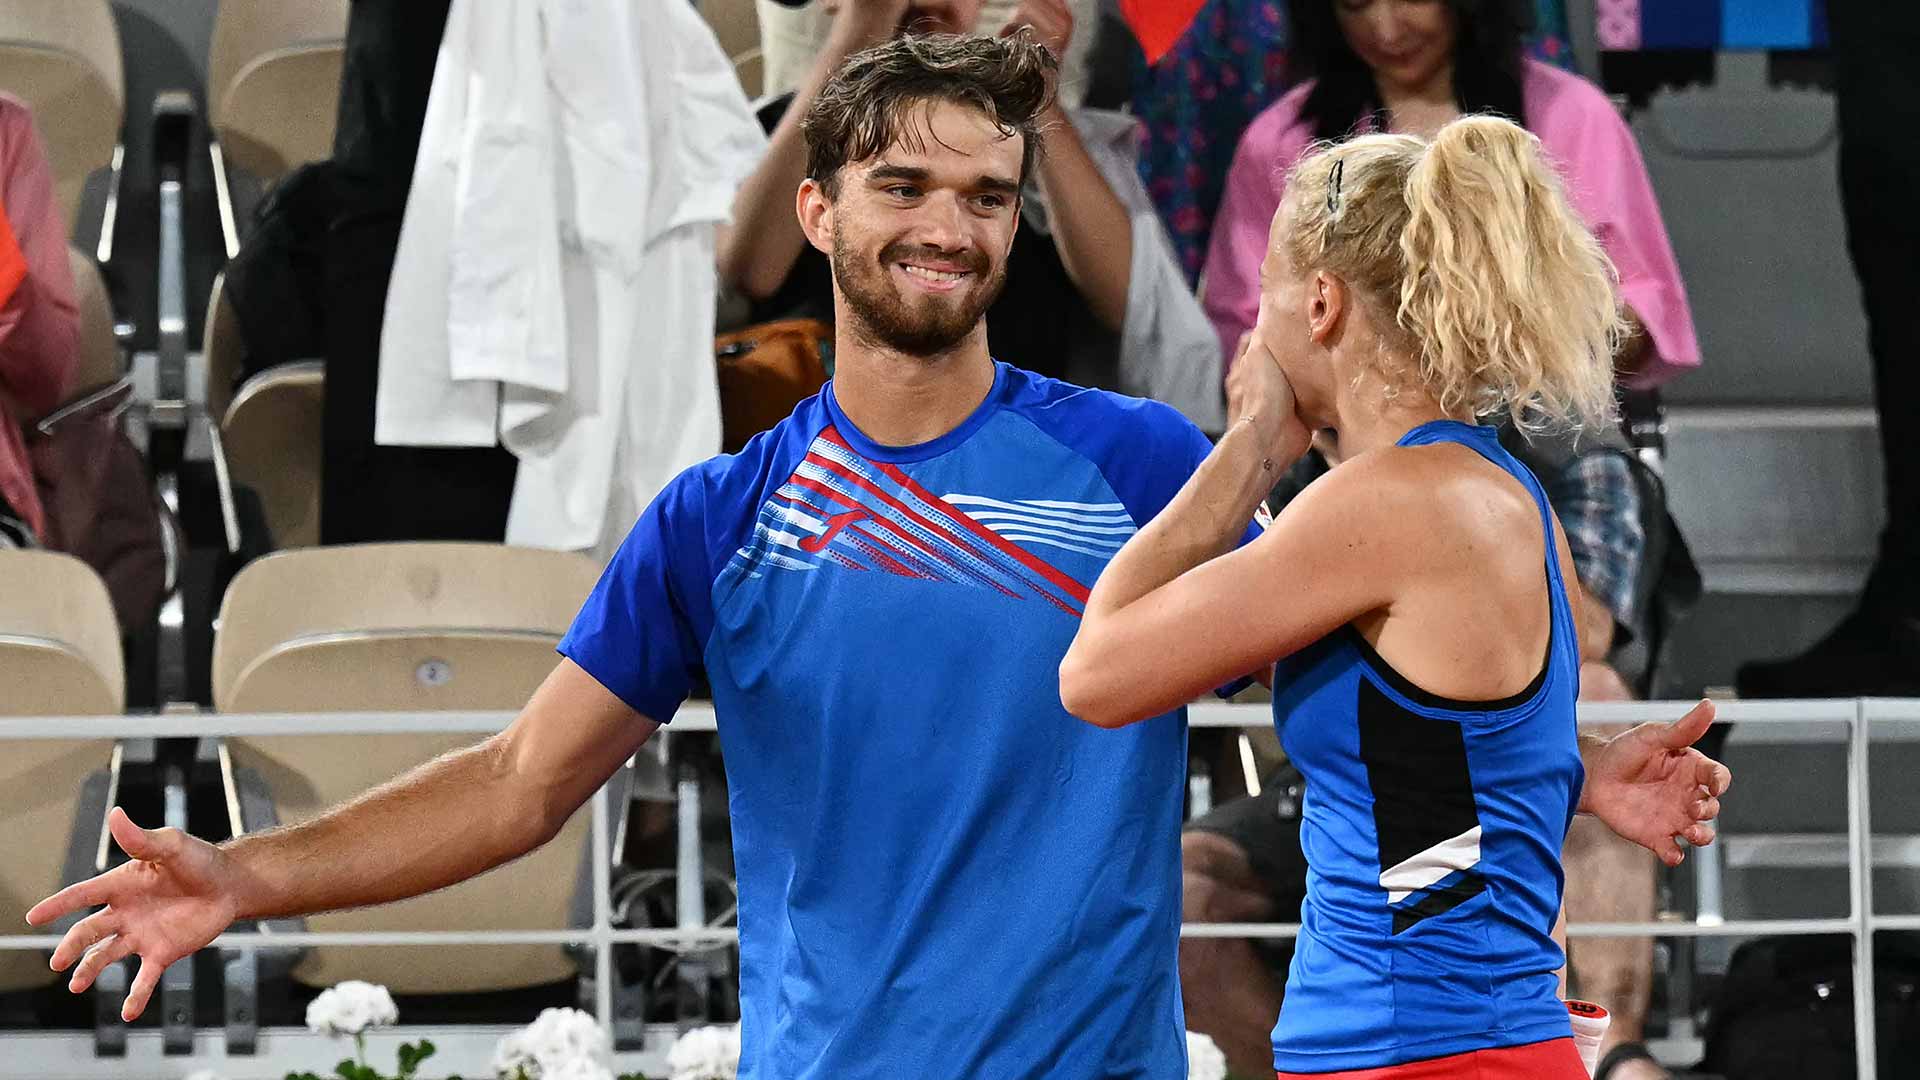 Two points from defeat, Machac & Siniakova rally to take mixed doubles gold